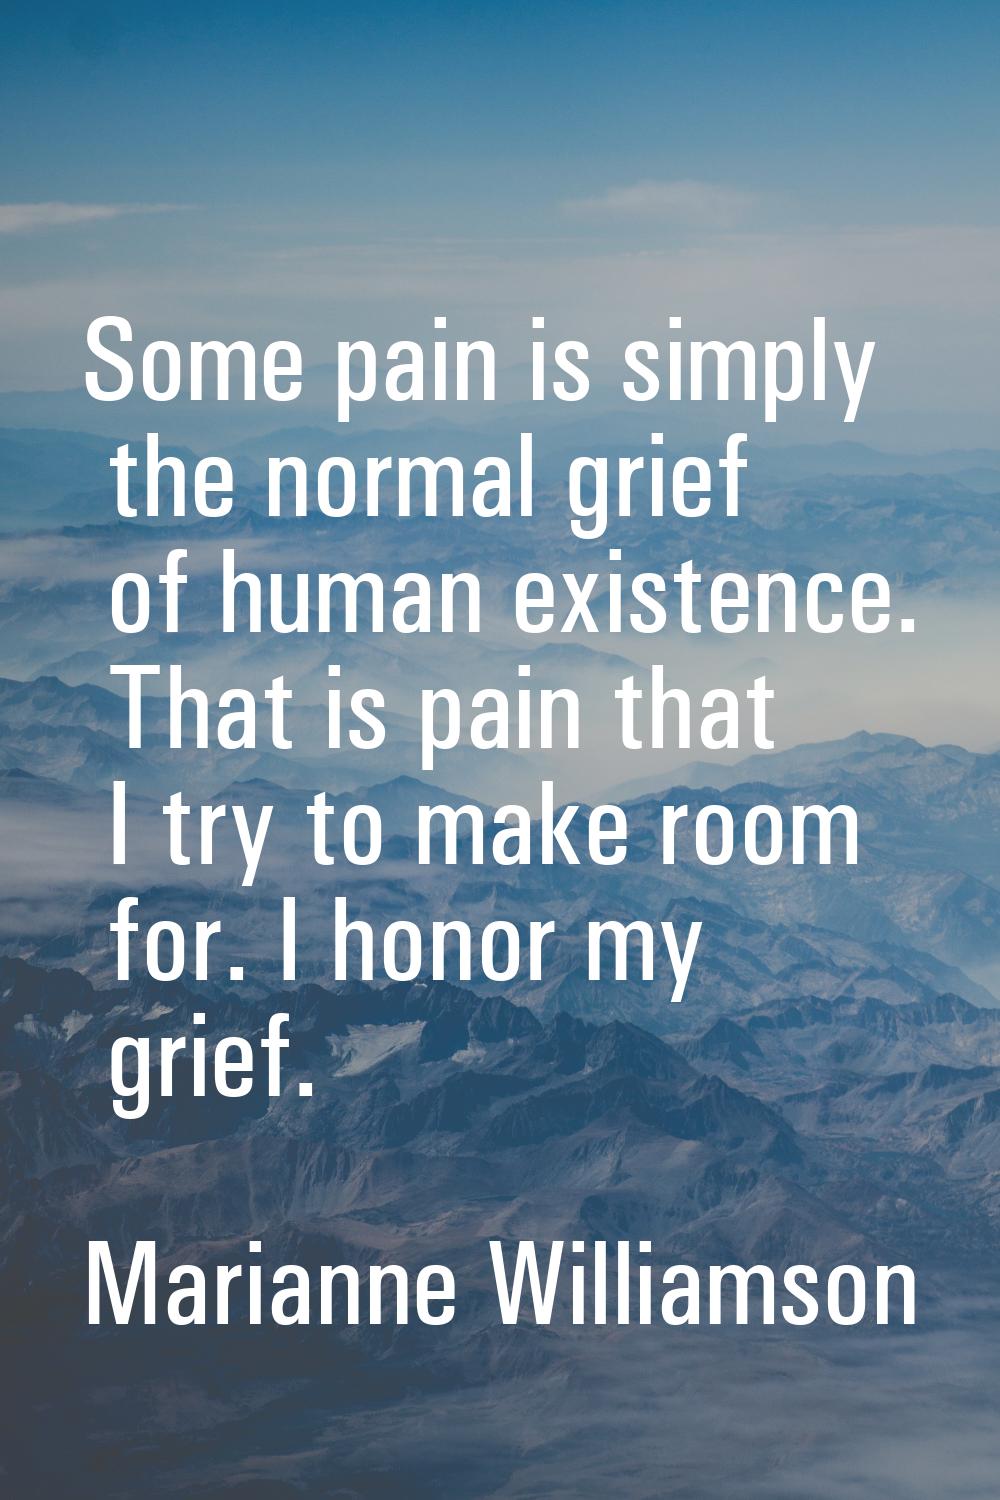 Some pain is simply the normal grief of human existence. That is pain that I try to make room for. 